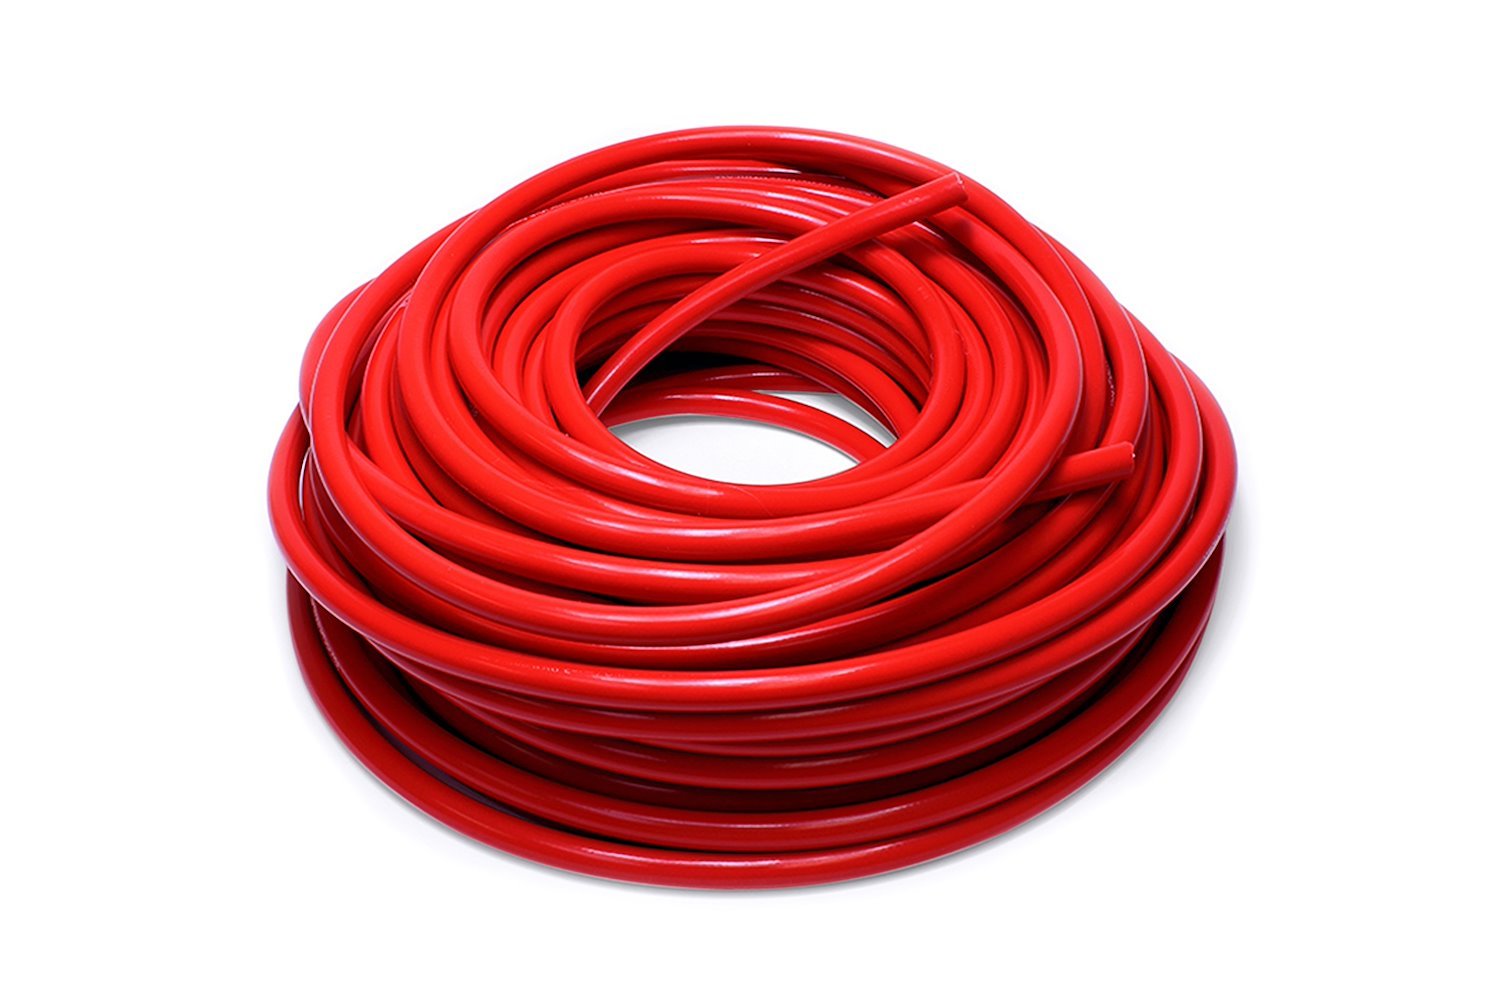 HTHH-062-REDx50 Silicone Heater Hose Tubing, High-Temp 1-Ply Reinforced, 5/8 in. ID, 50 ft. Roll, Red